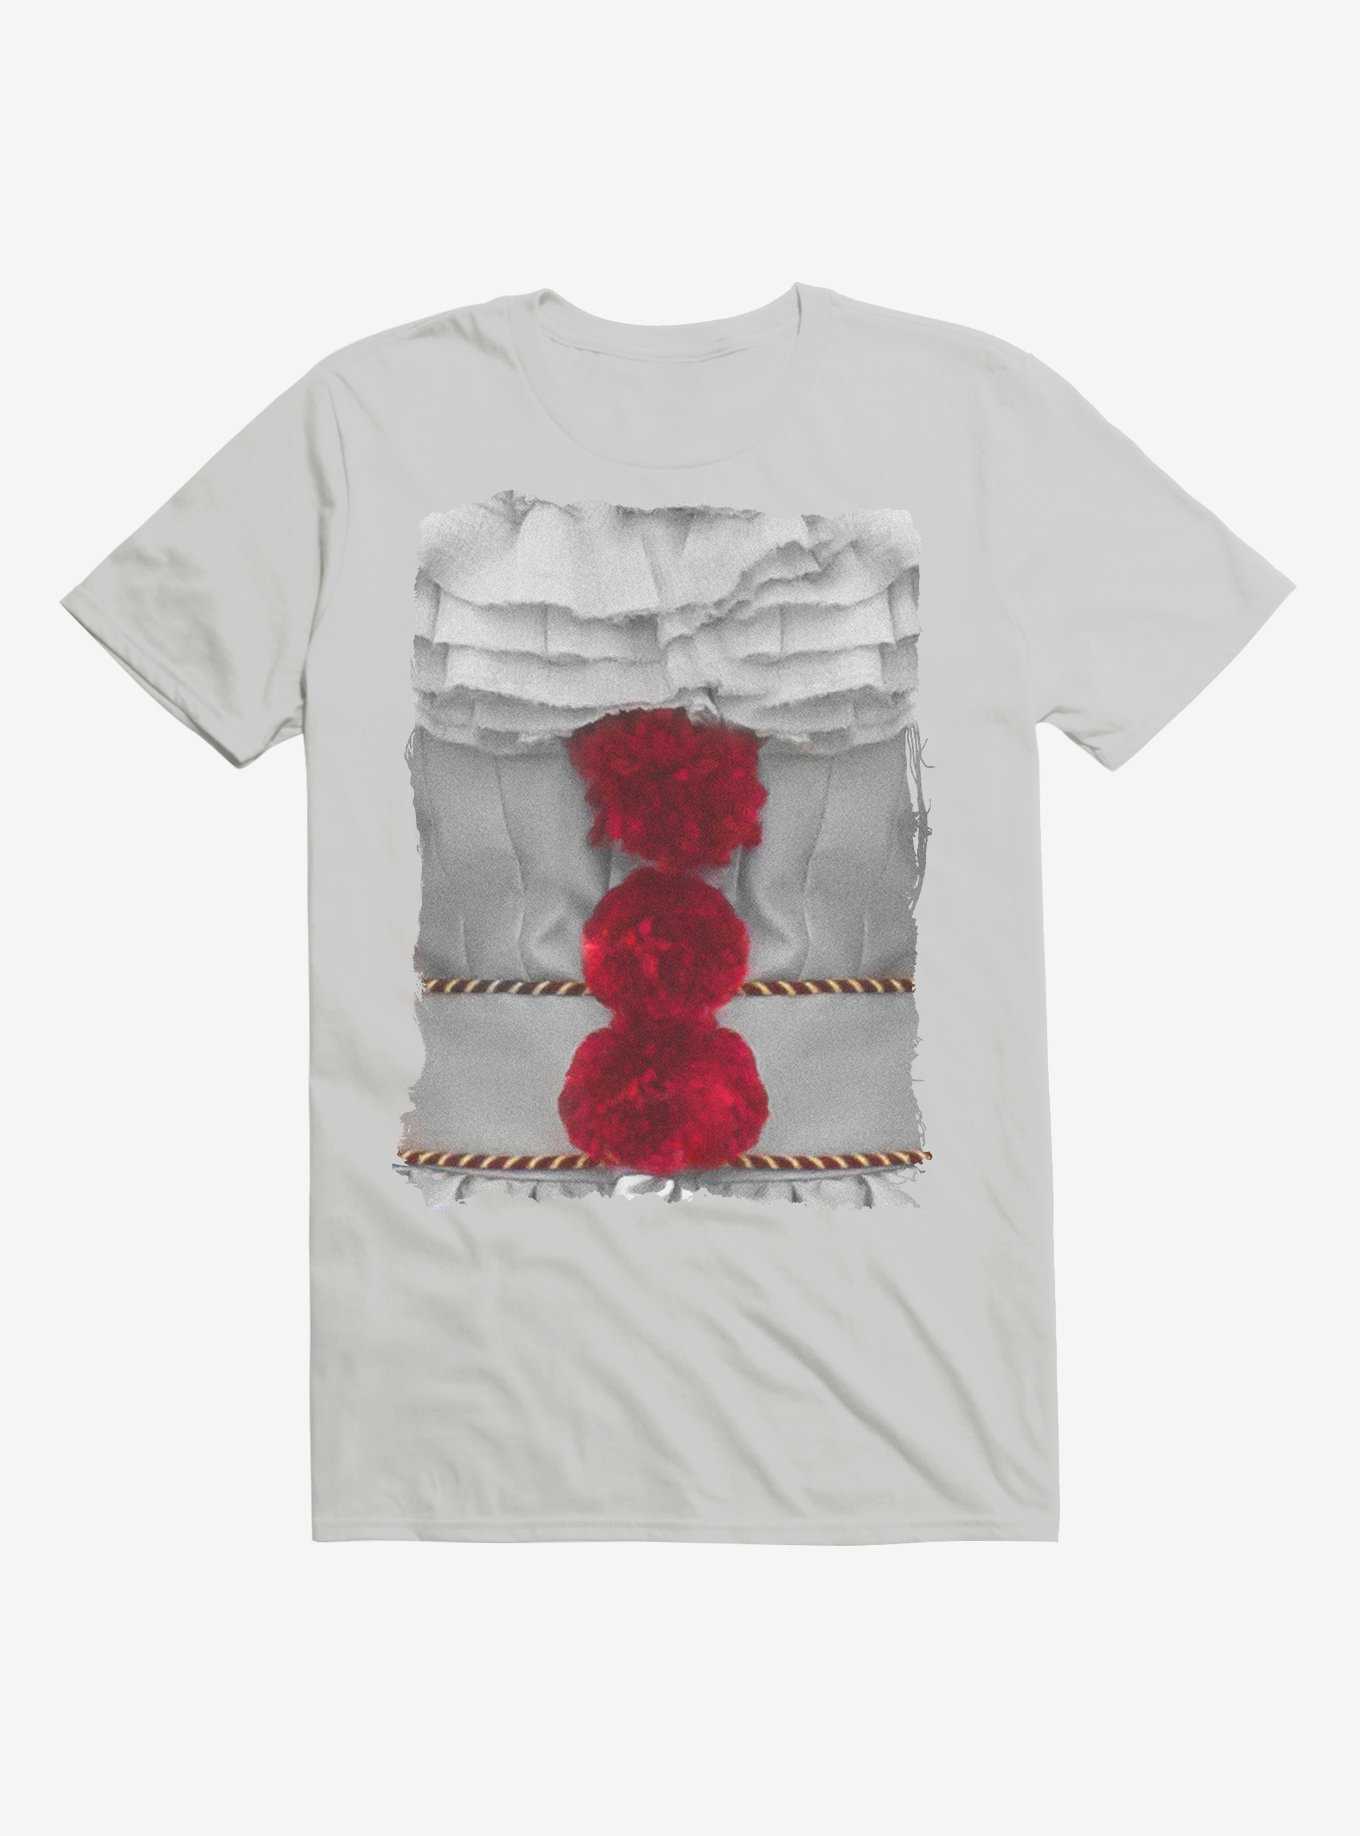 IT 2 Pennywise Cosplay T-Shirt, , hi-res